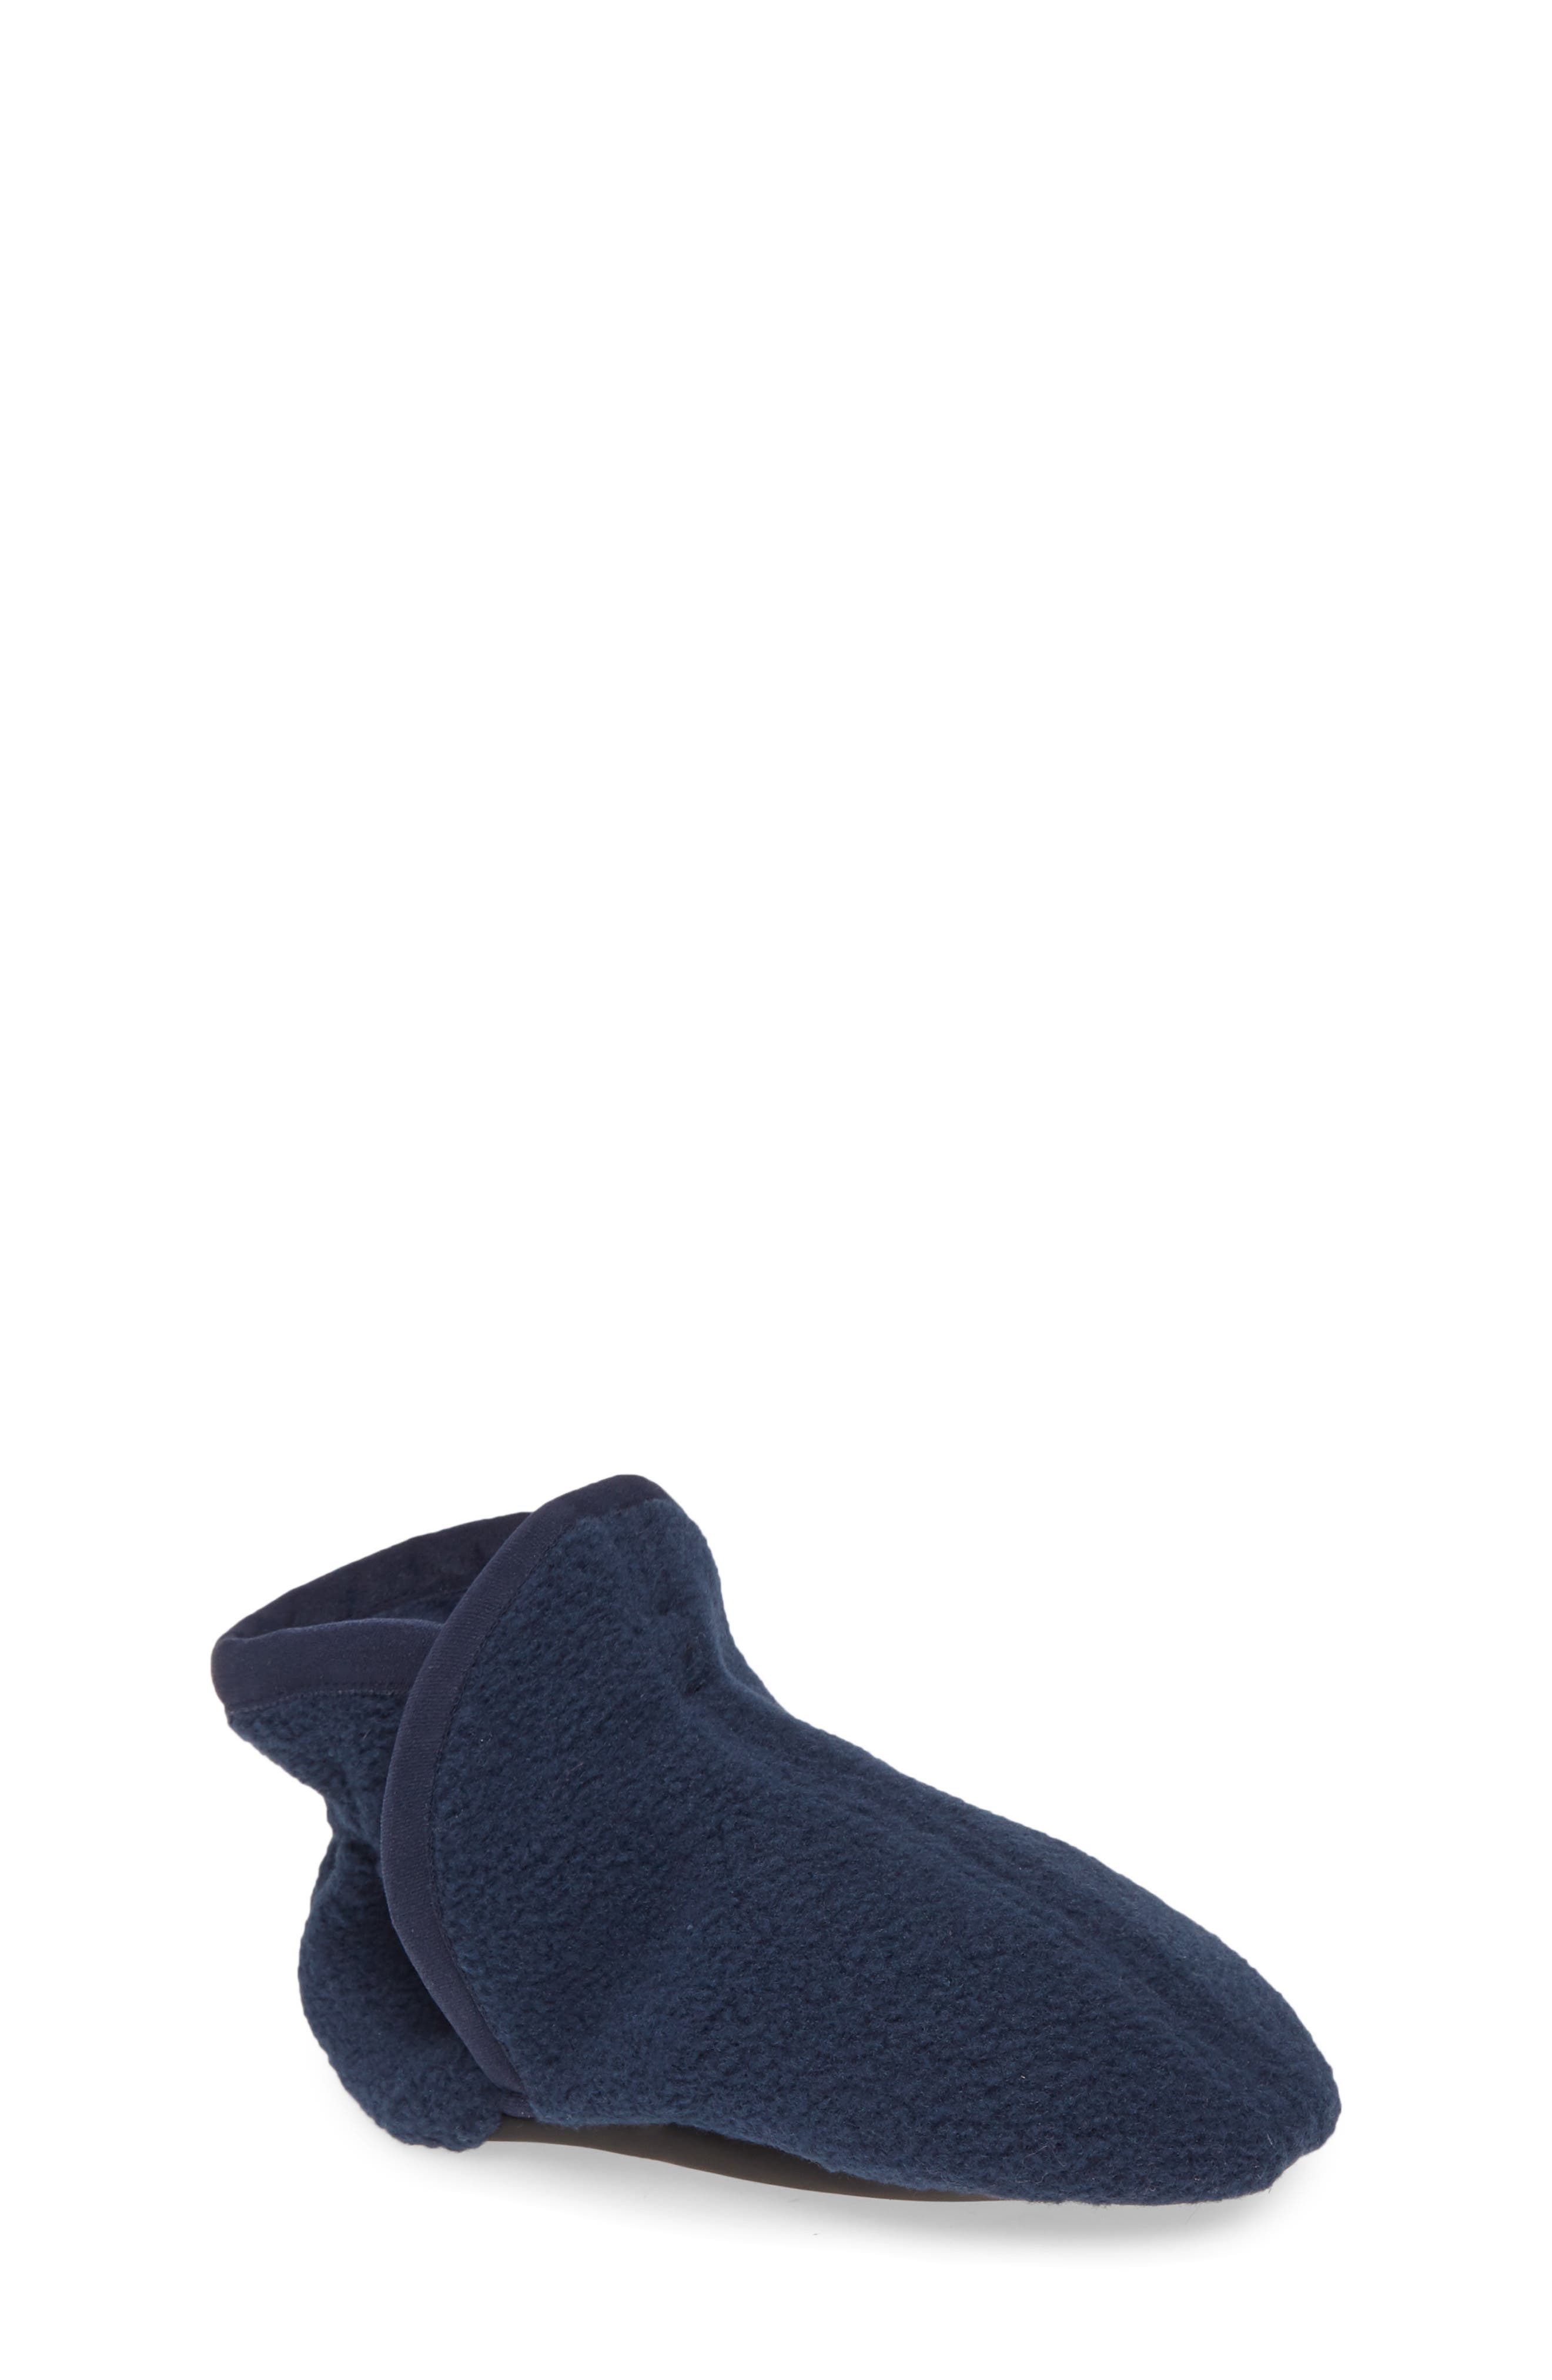 patagonia baby synchilla booties